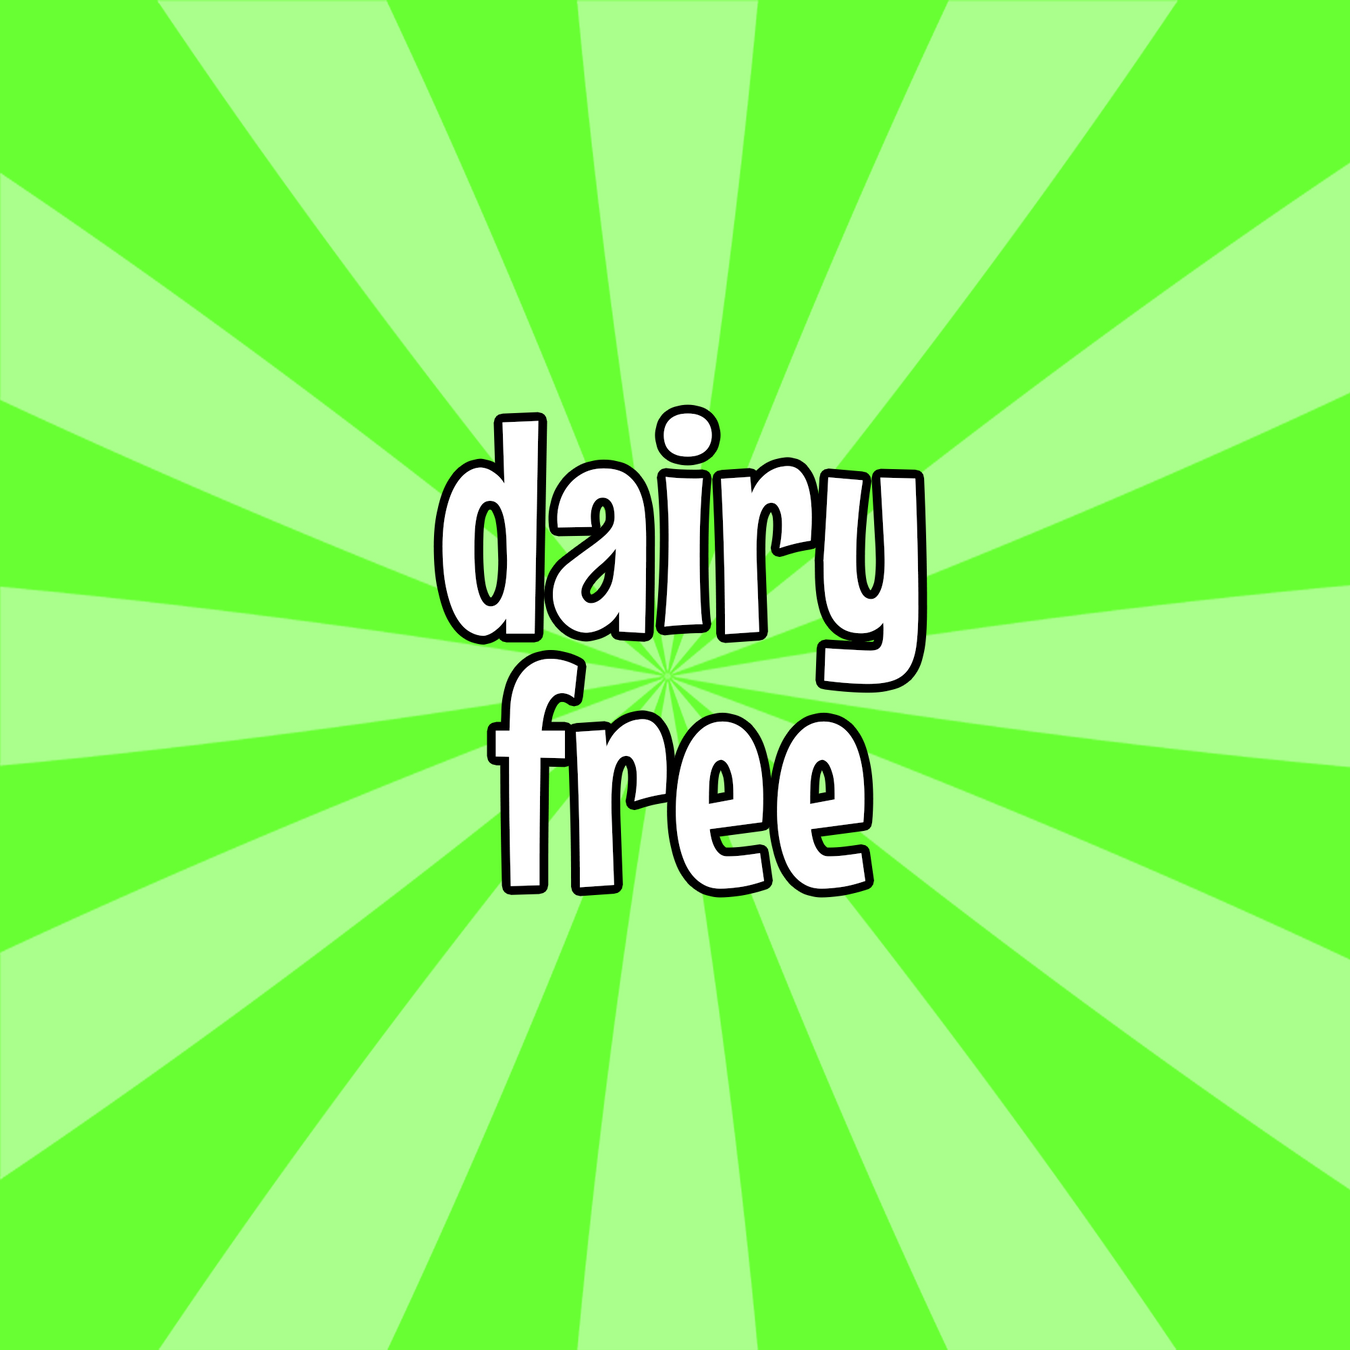 DAIRY-FREE, Sugarfree, Glutenfree, Diabetic, Keto, Low Carb, and Banting Products